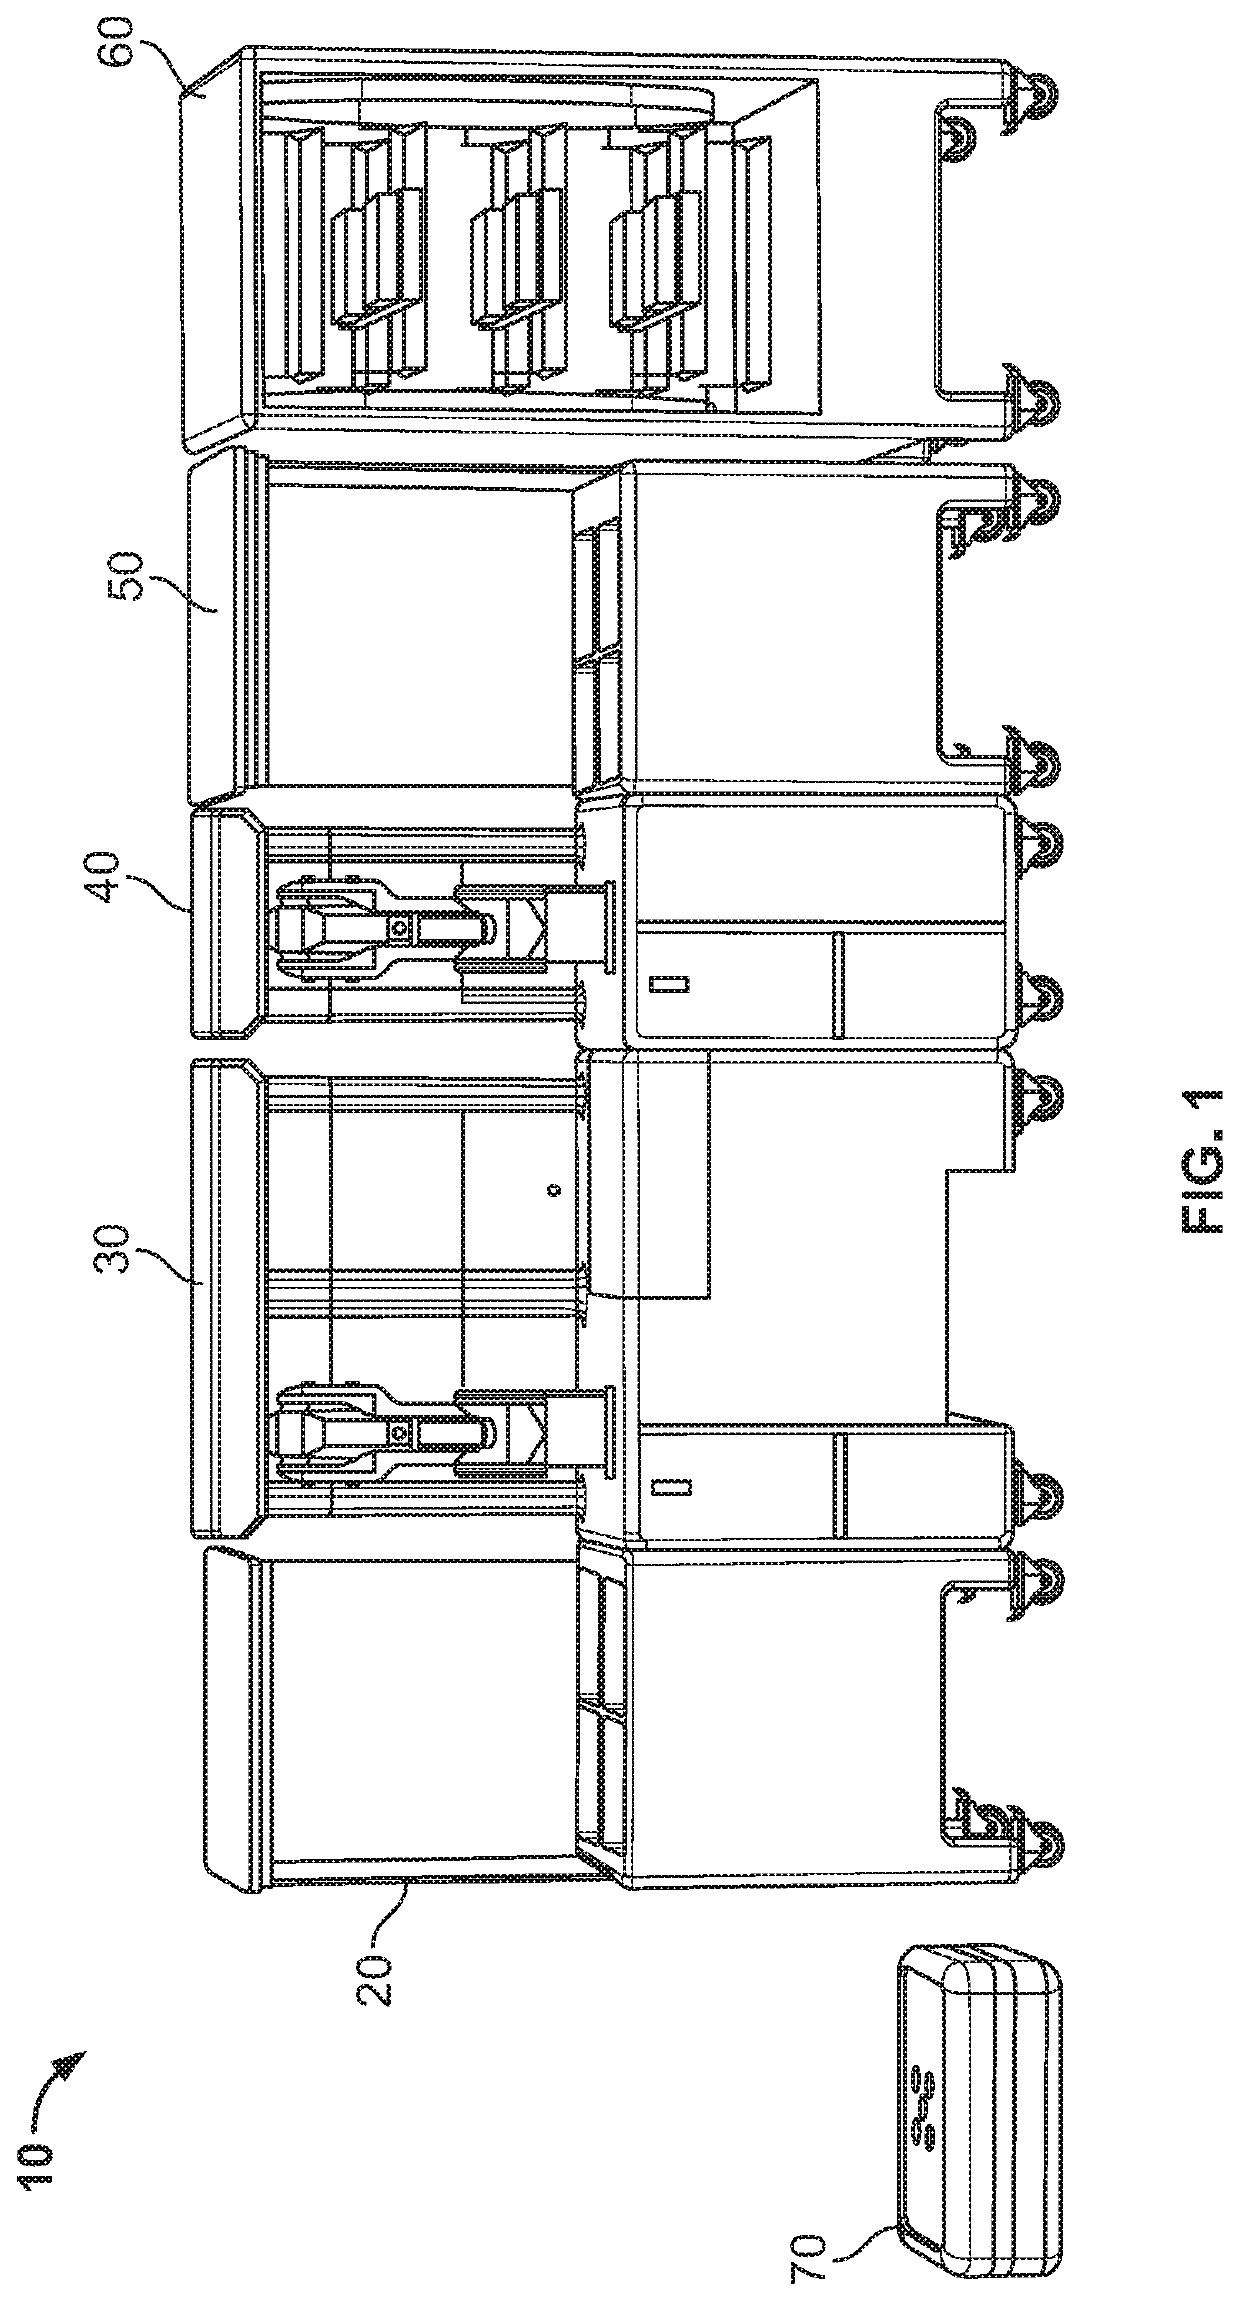 Modular robotic food preparation system and related methods